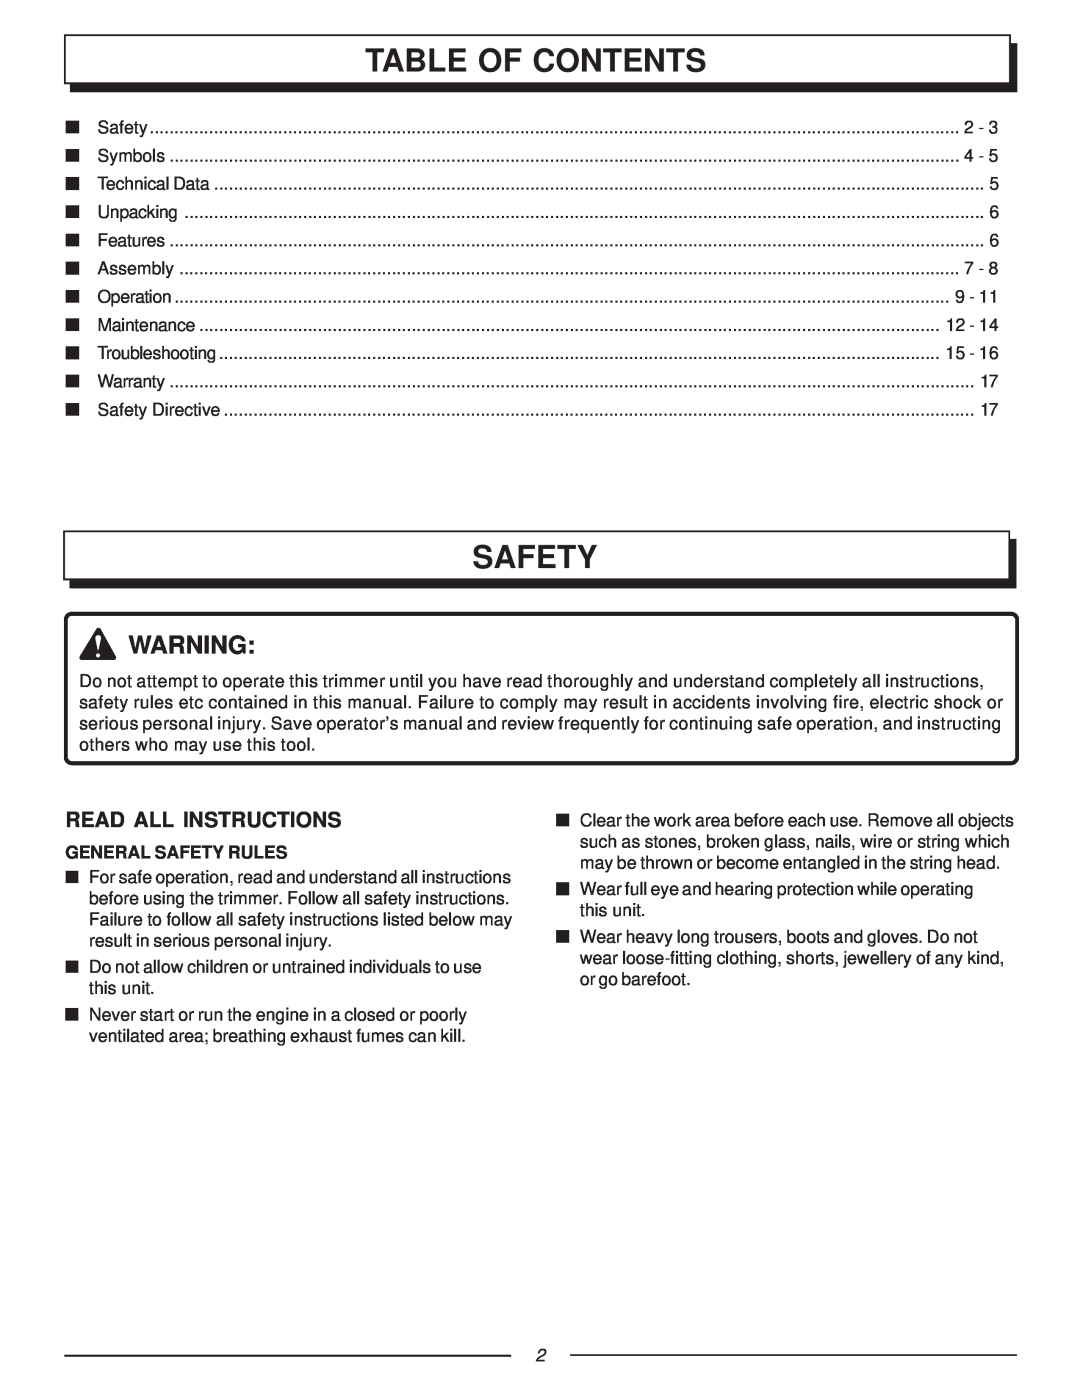 Homelite UT70121A manual Table Of Contents, Read All Instructions, General Safety Rules 